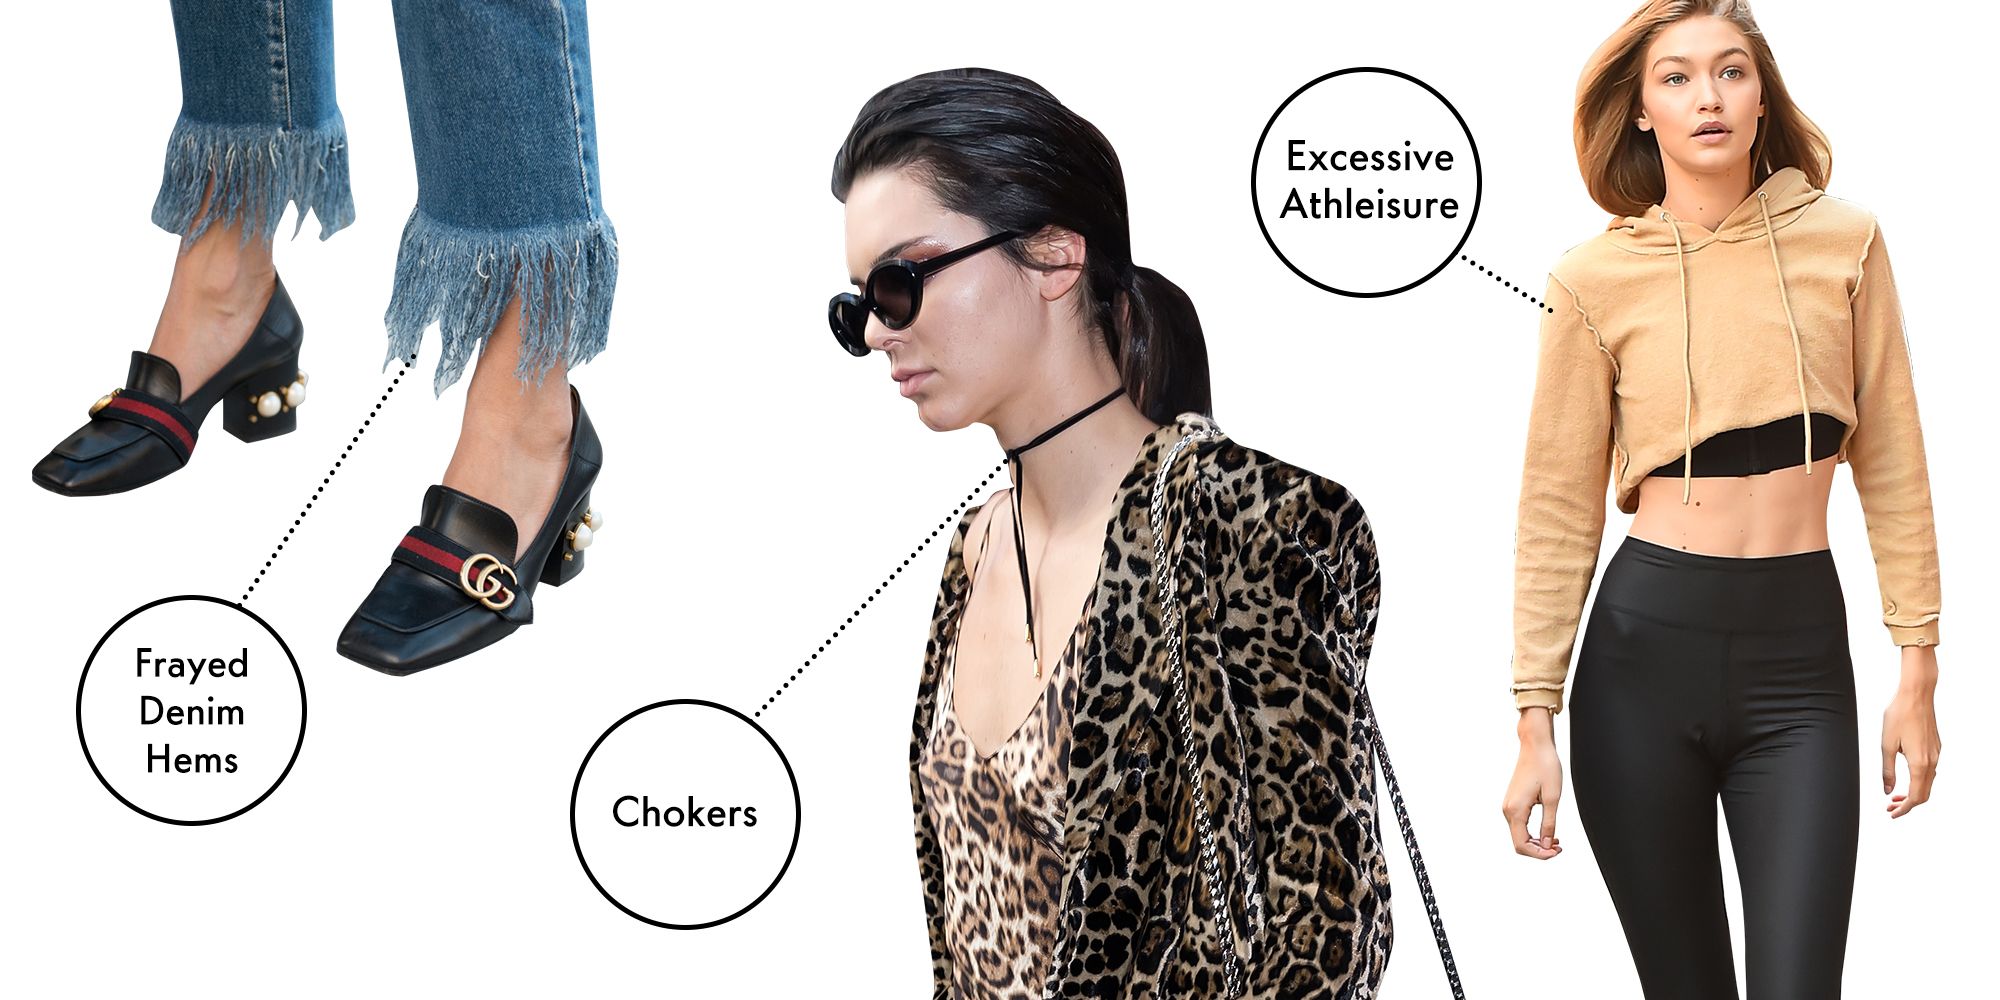 17 Fashion Trends That Should Stay in 2016